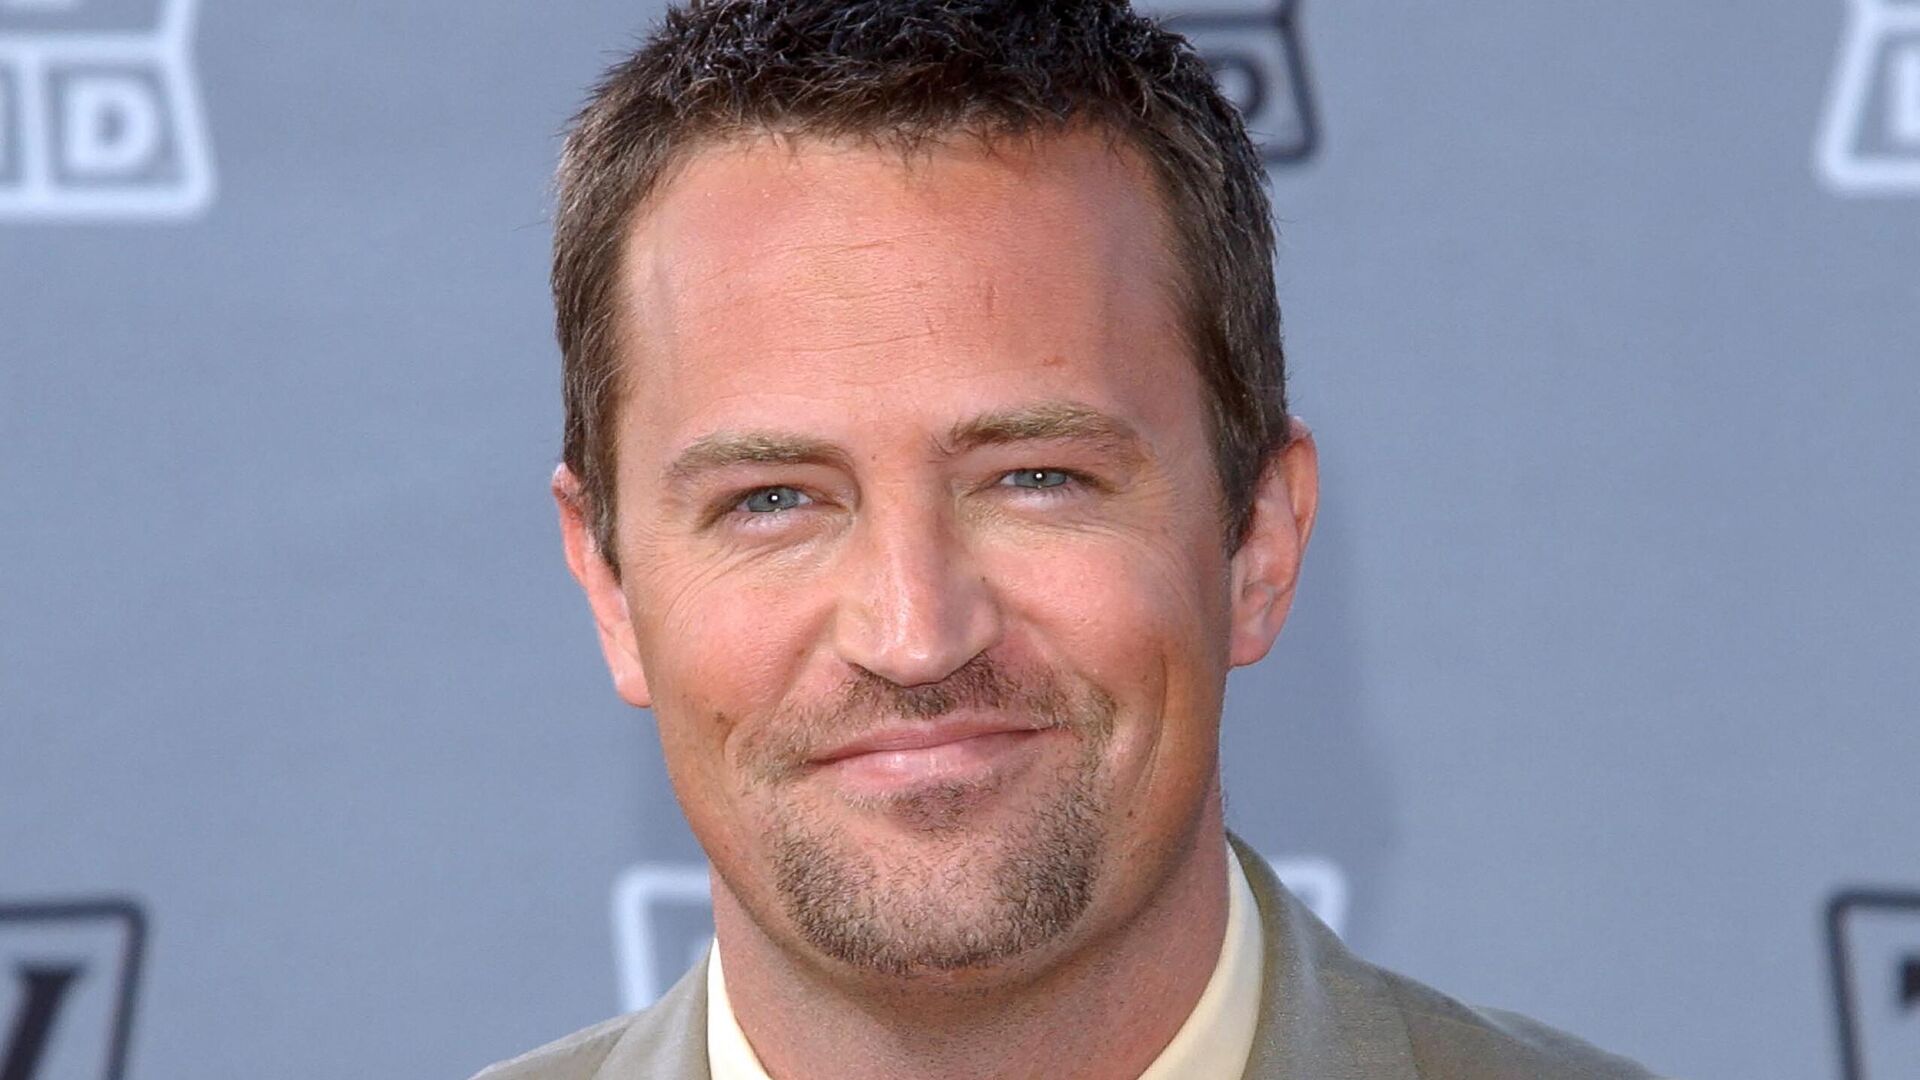 Hollywood Mourns the Loss of "Friends" Star Matthew Perry